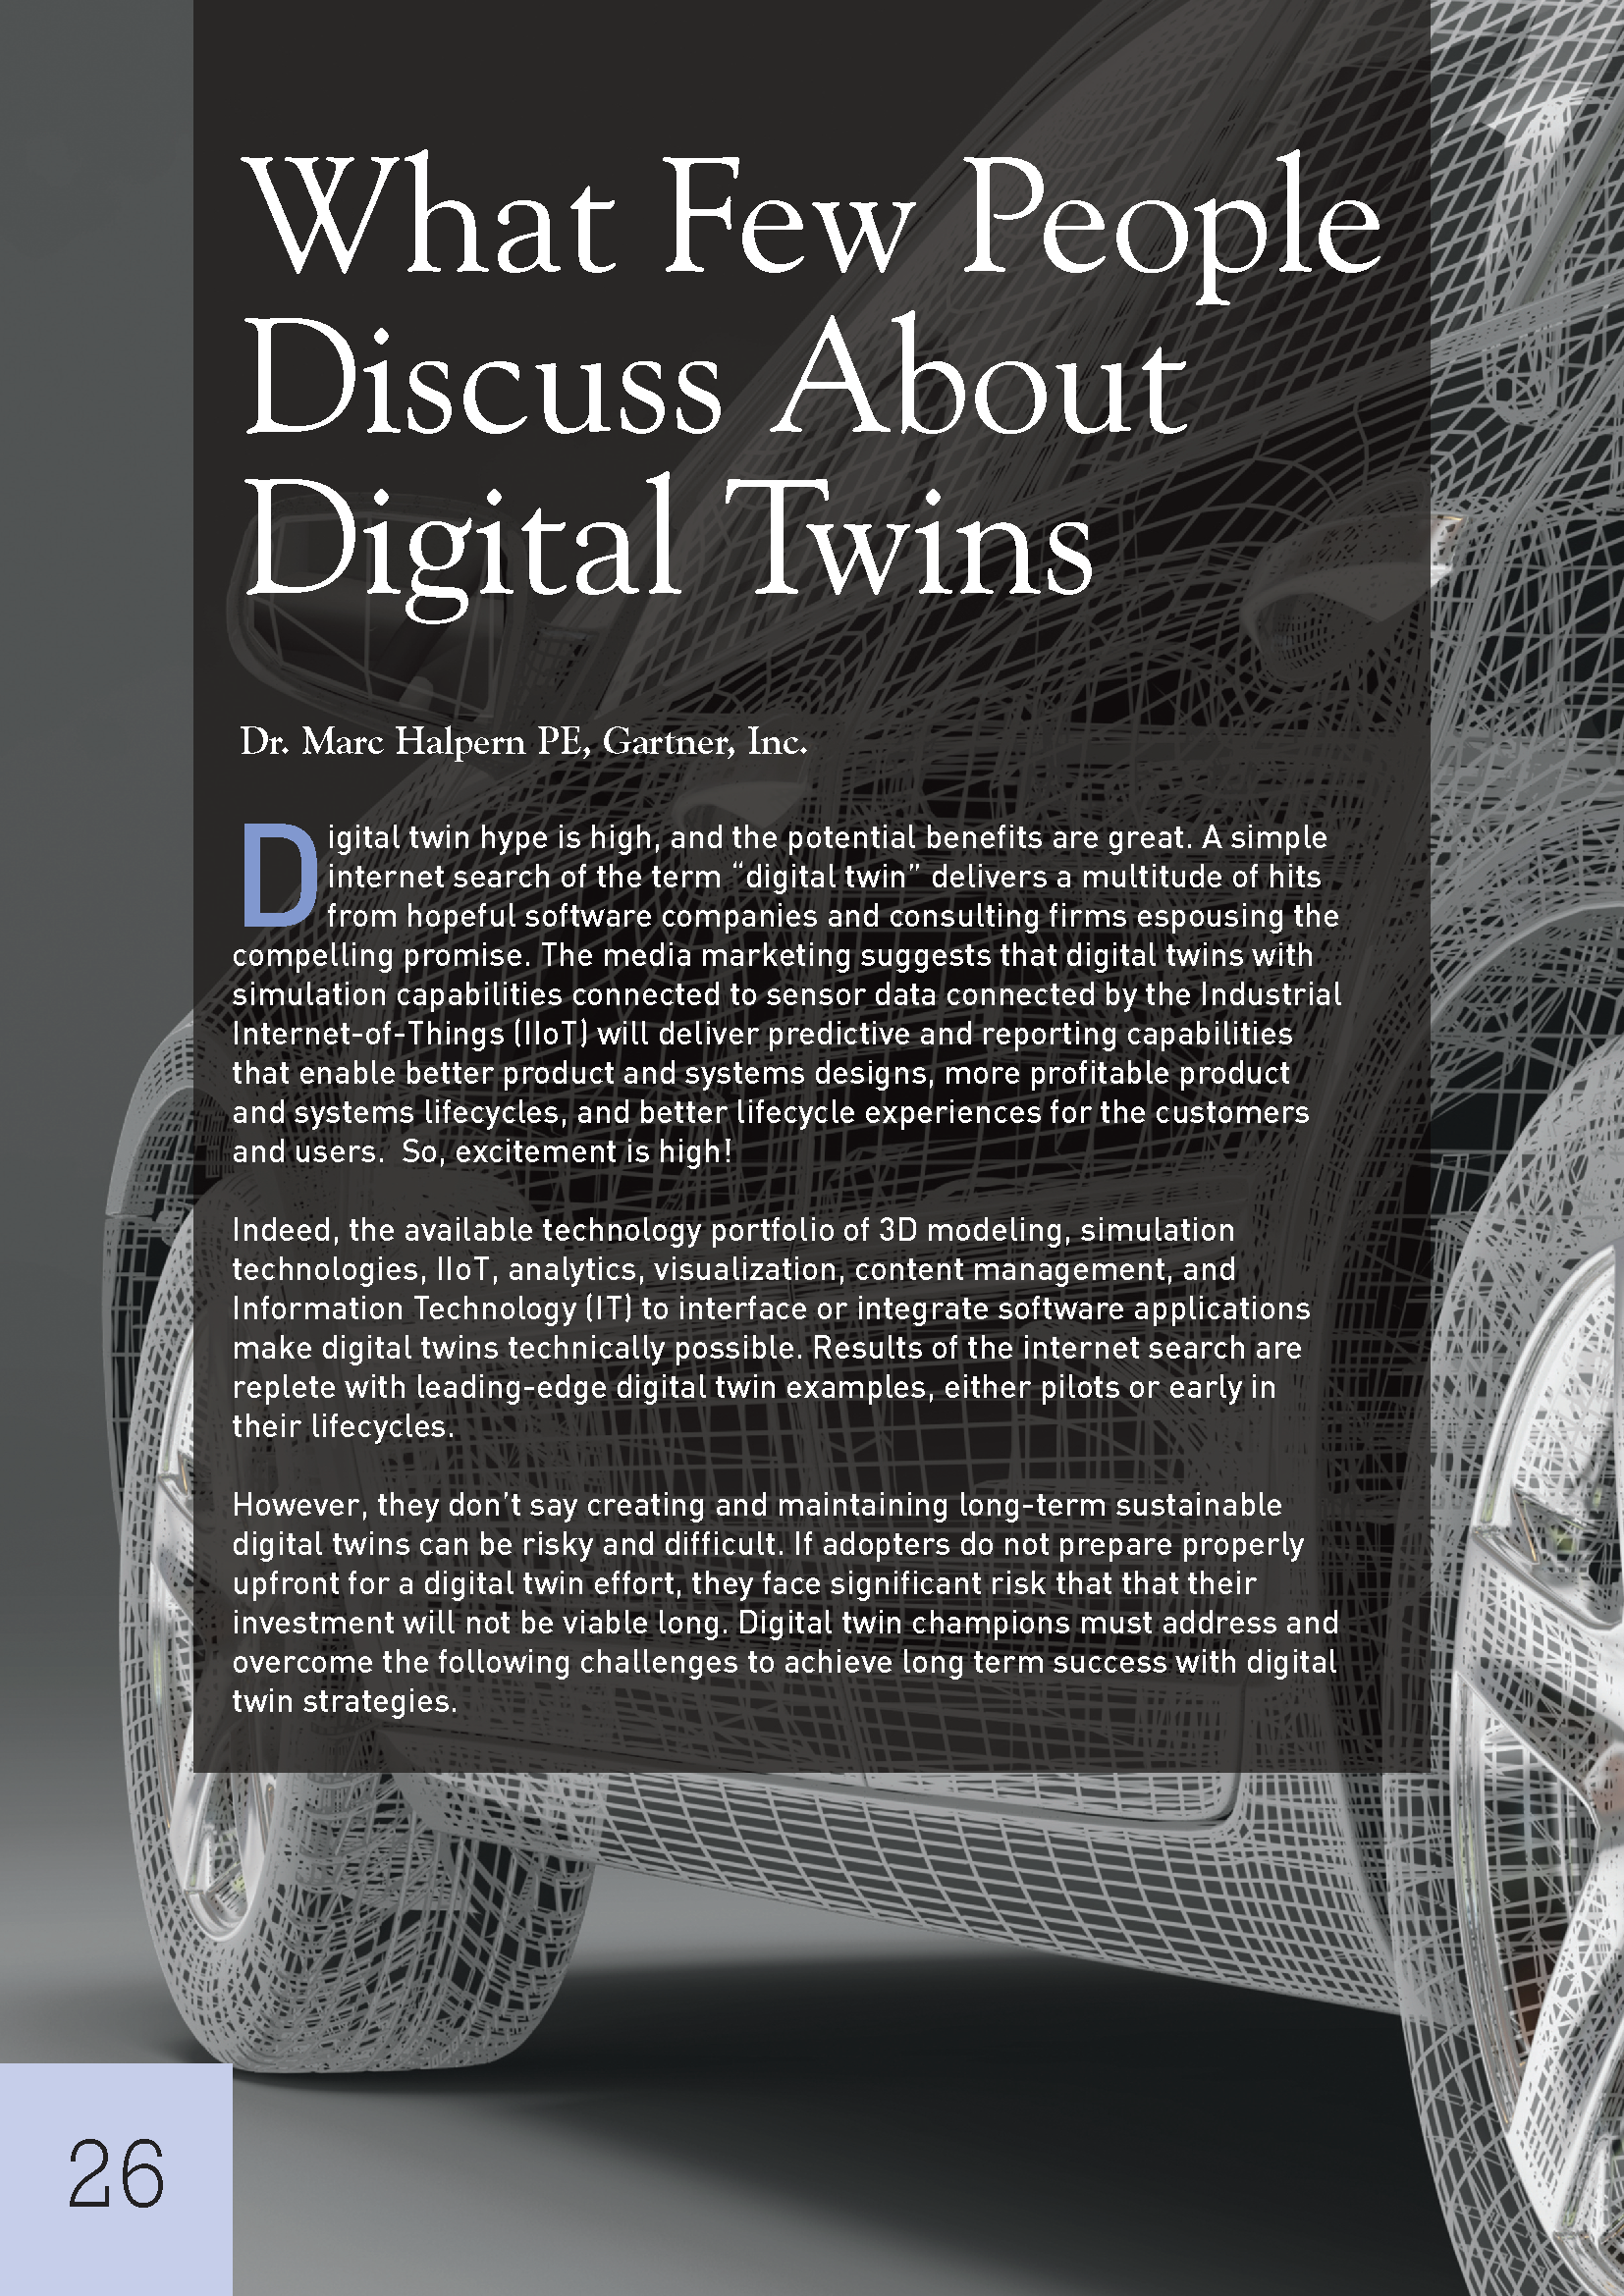 CHALLENGES WITH DIGITAL TWINS